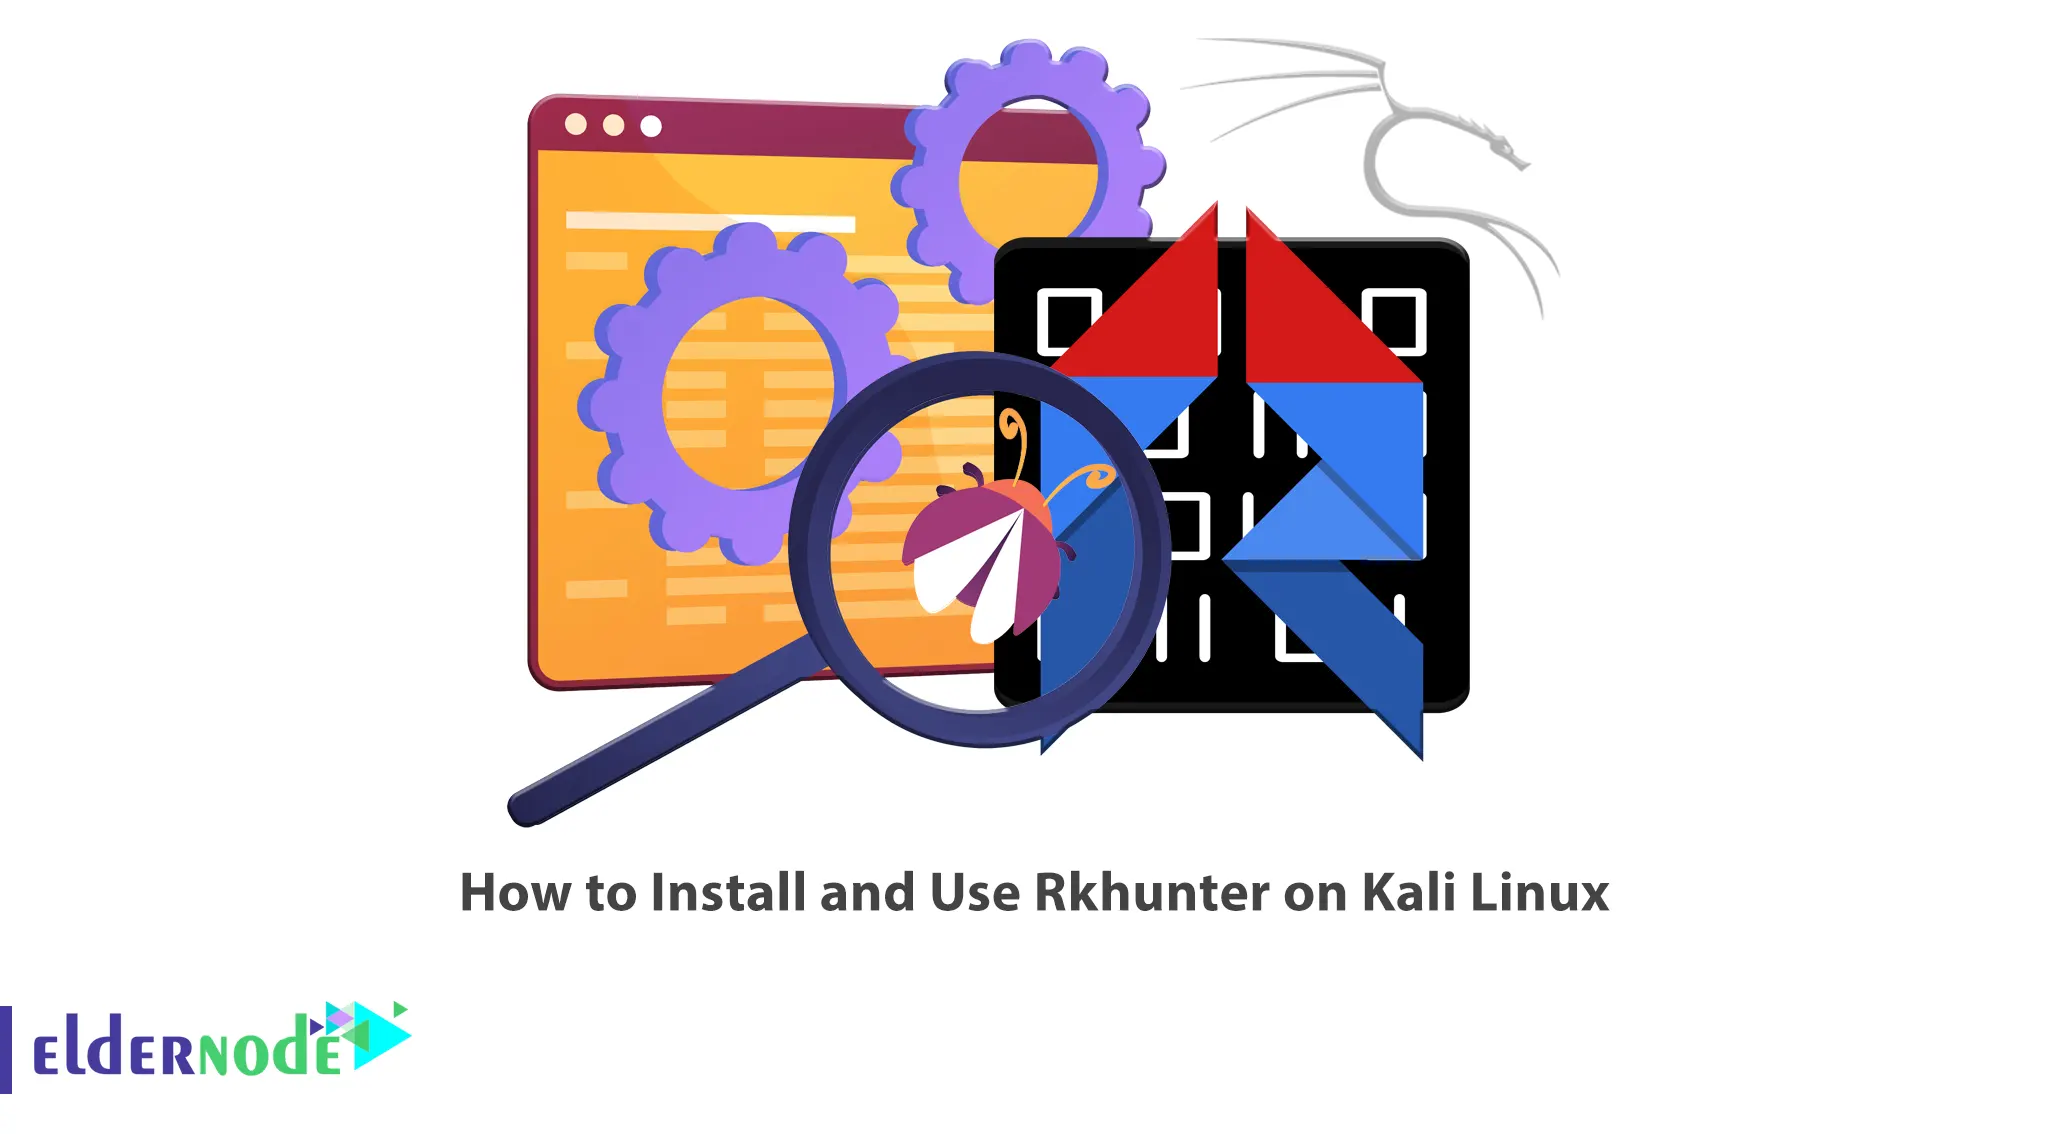 How to Install and Use Rkhunter on Kali Linux